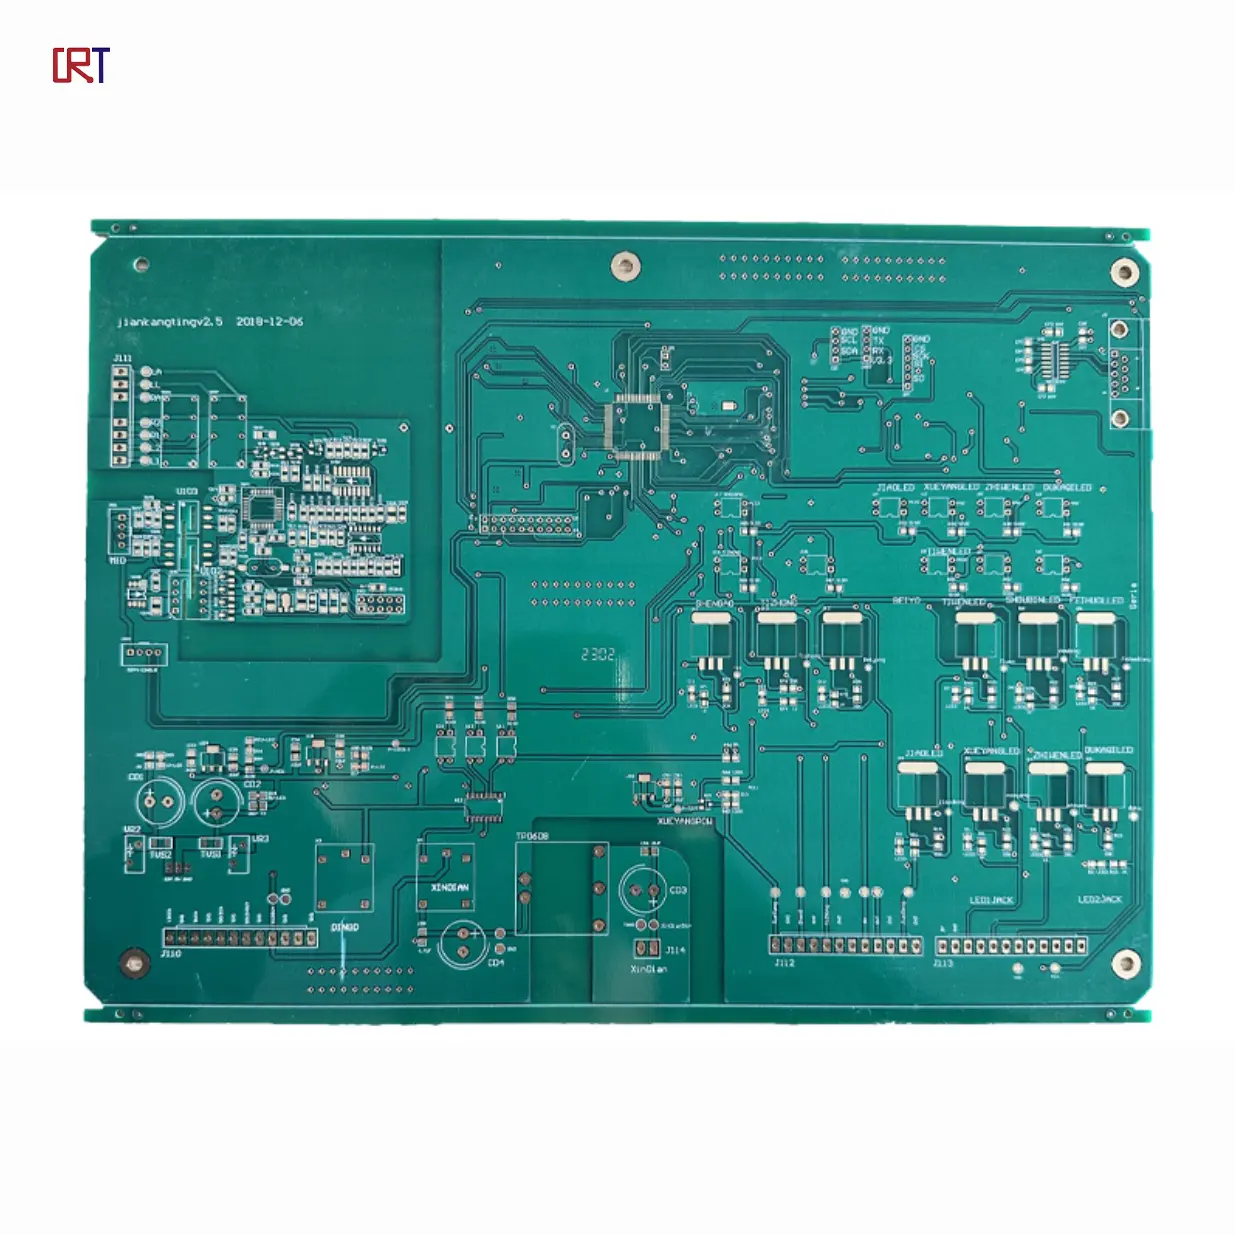 Profissional PCBA Board Assembly Plant Circuit Board Manufacturing Services PCB Design Services